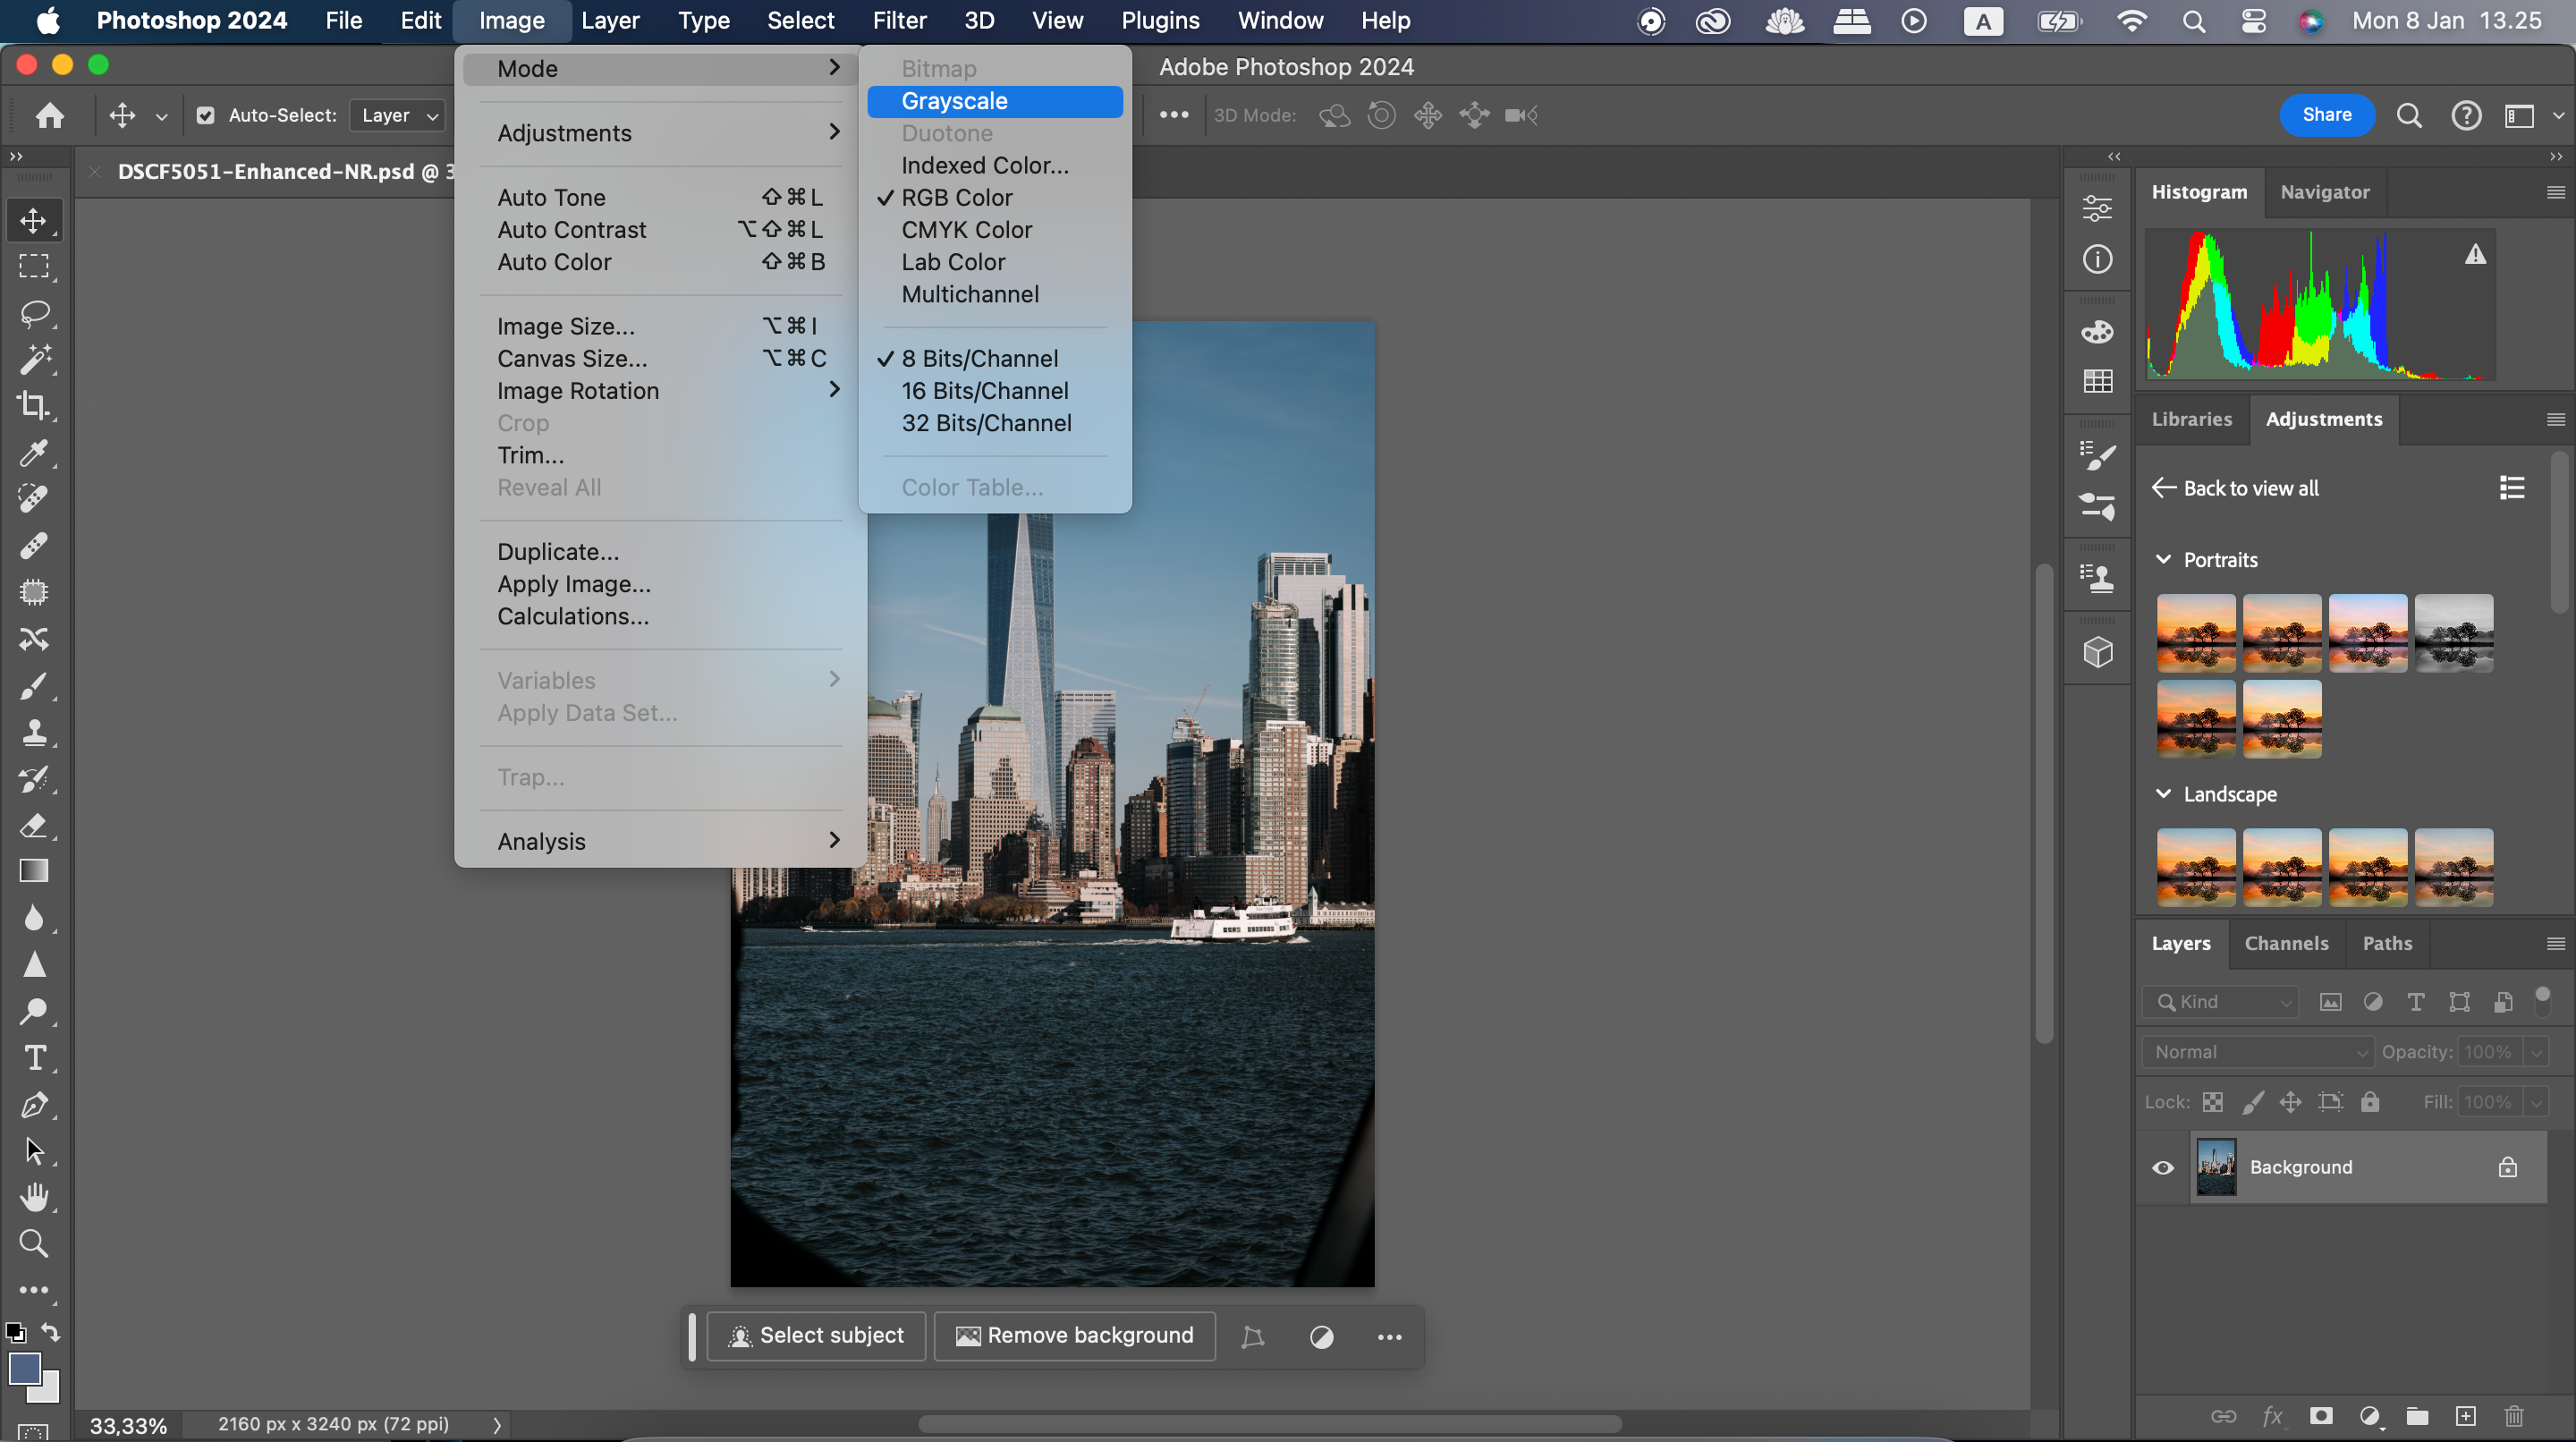 The different image modes available in Adobe Photohshop